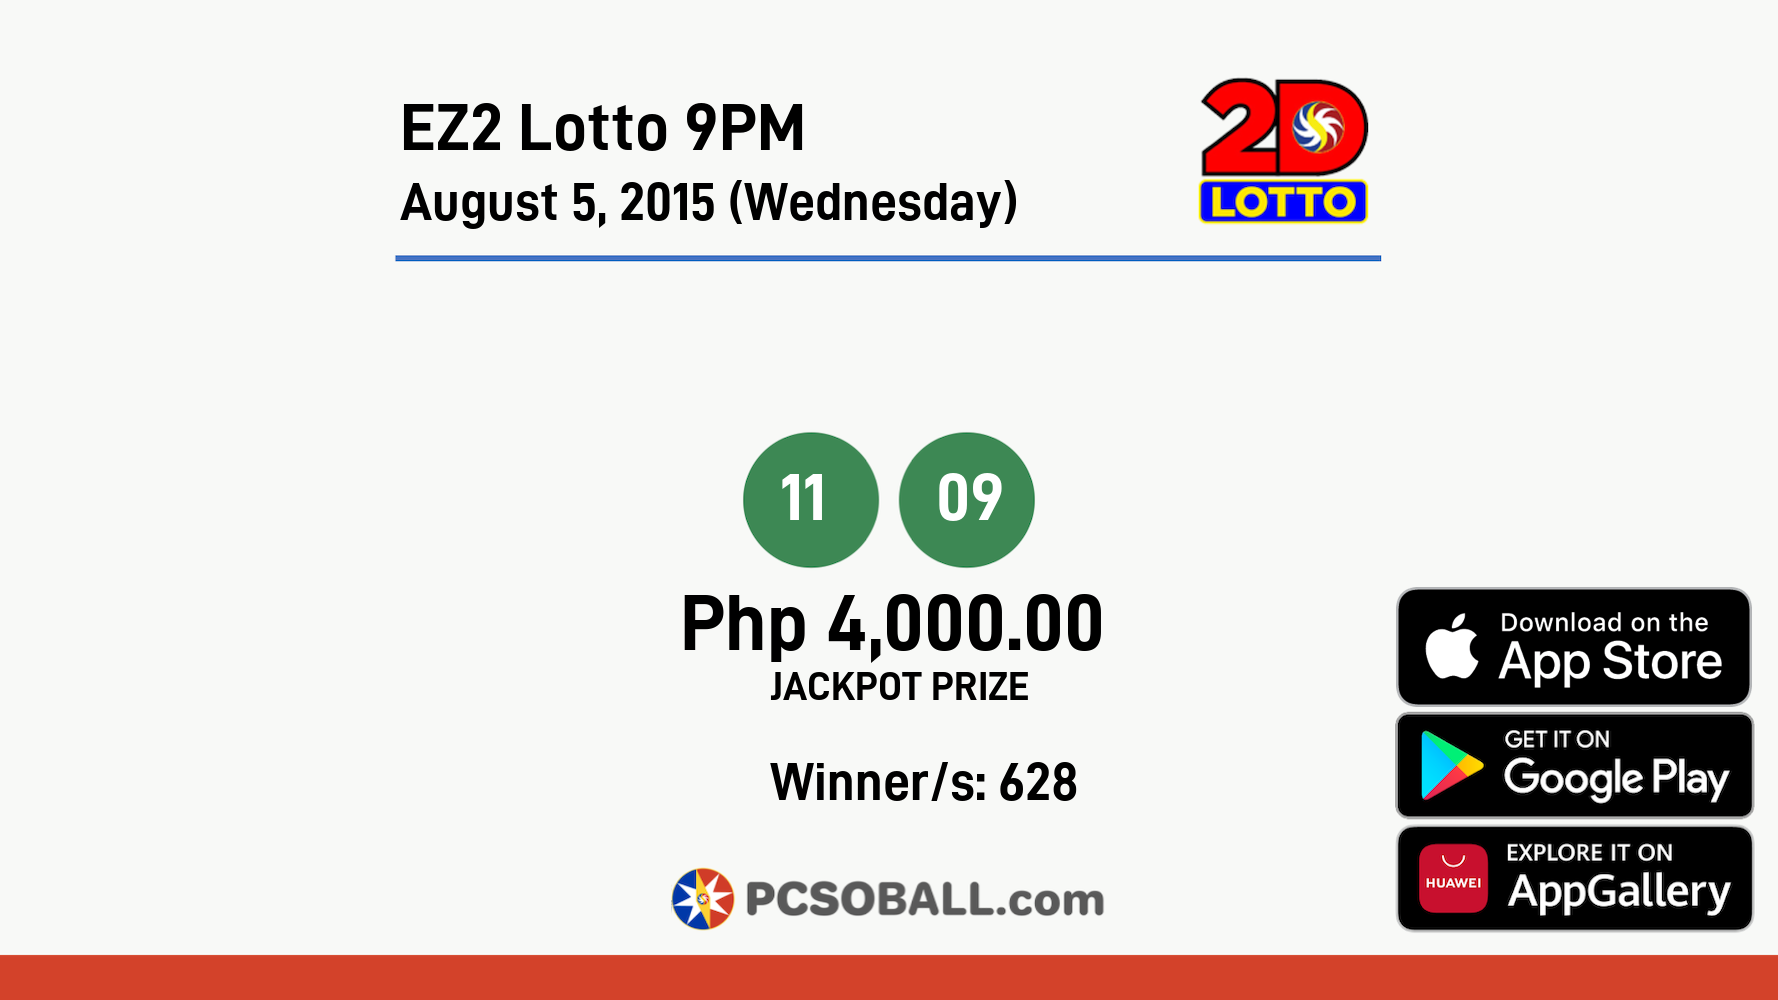 EZ2 Lotto 9PM August 5, 2015 (Wednesday) Result